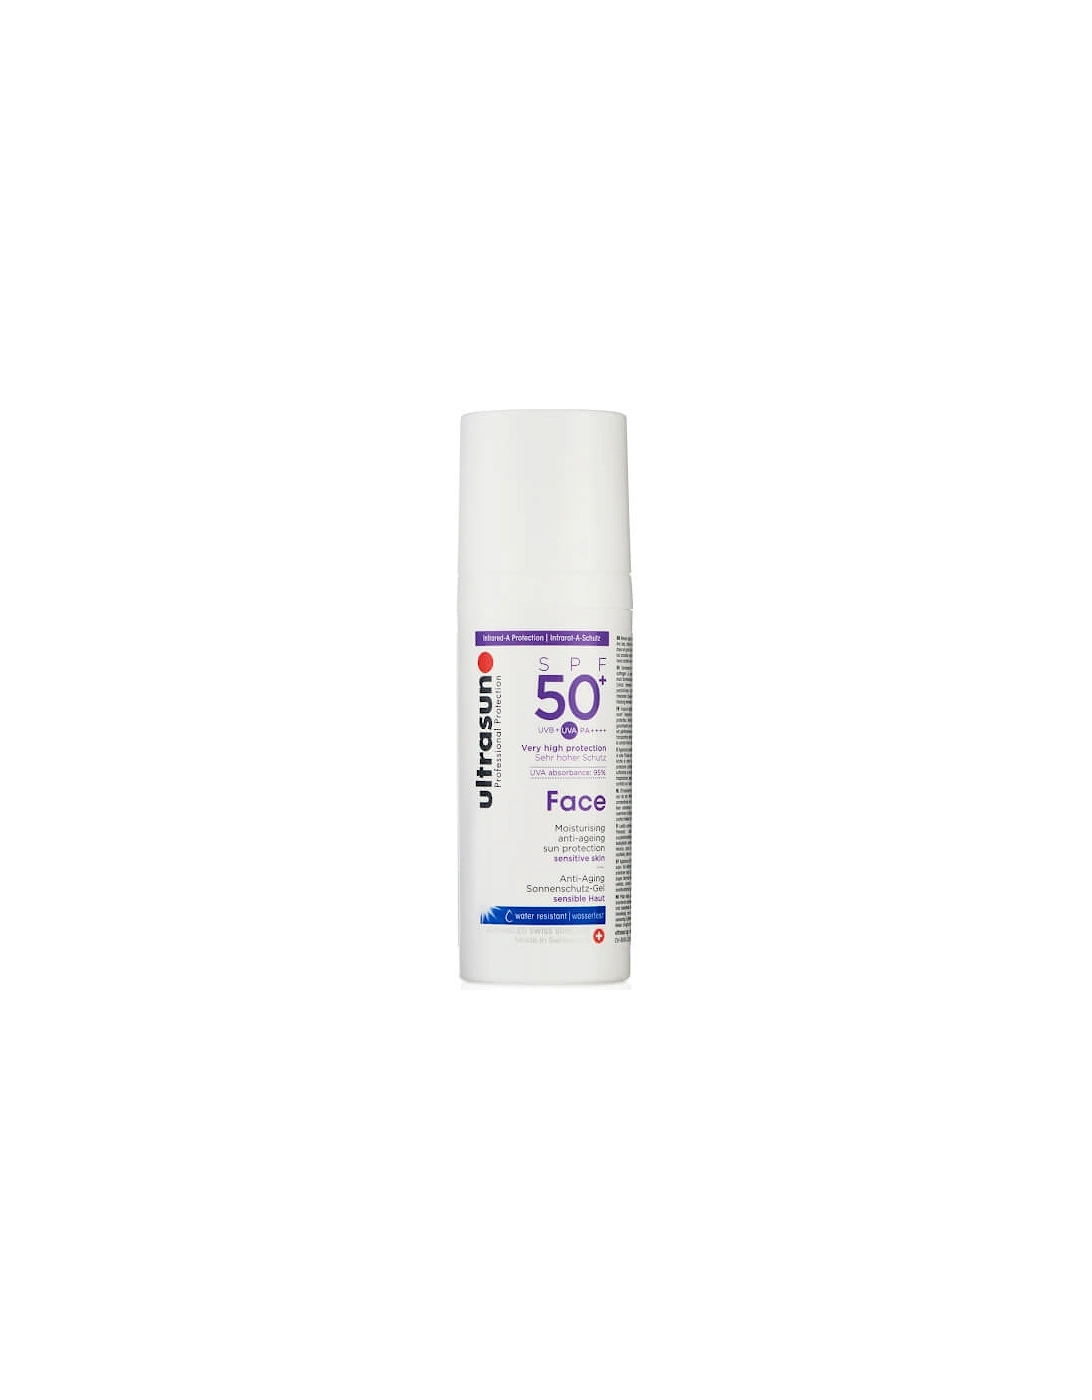 Face Anti-Ageing Lotion SPF 50+ 50ml - - Face Anti-Ageing Lotion SPF 50+ 50ml - Sue, 2 of 1